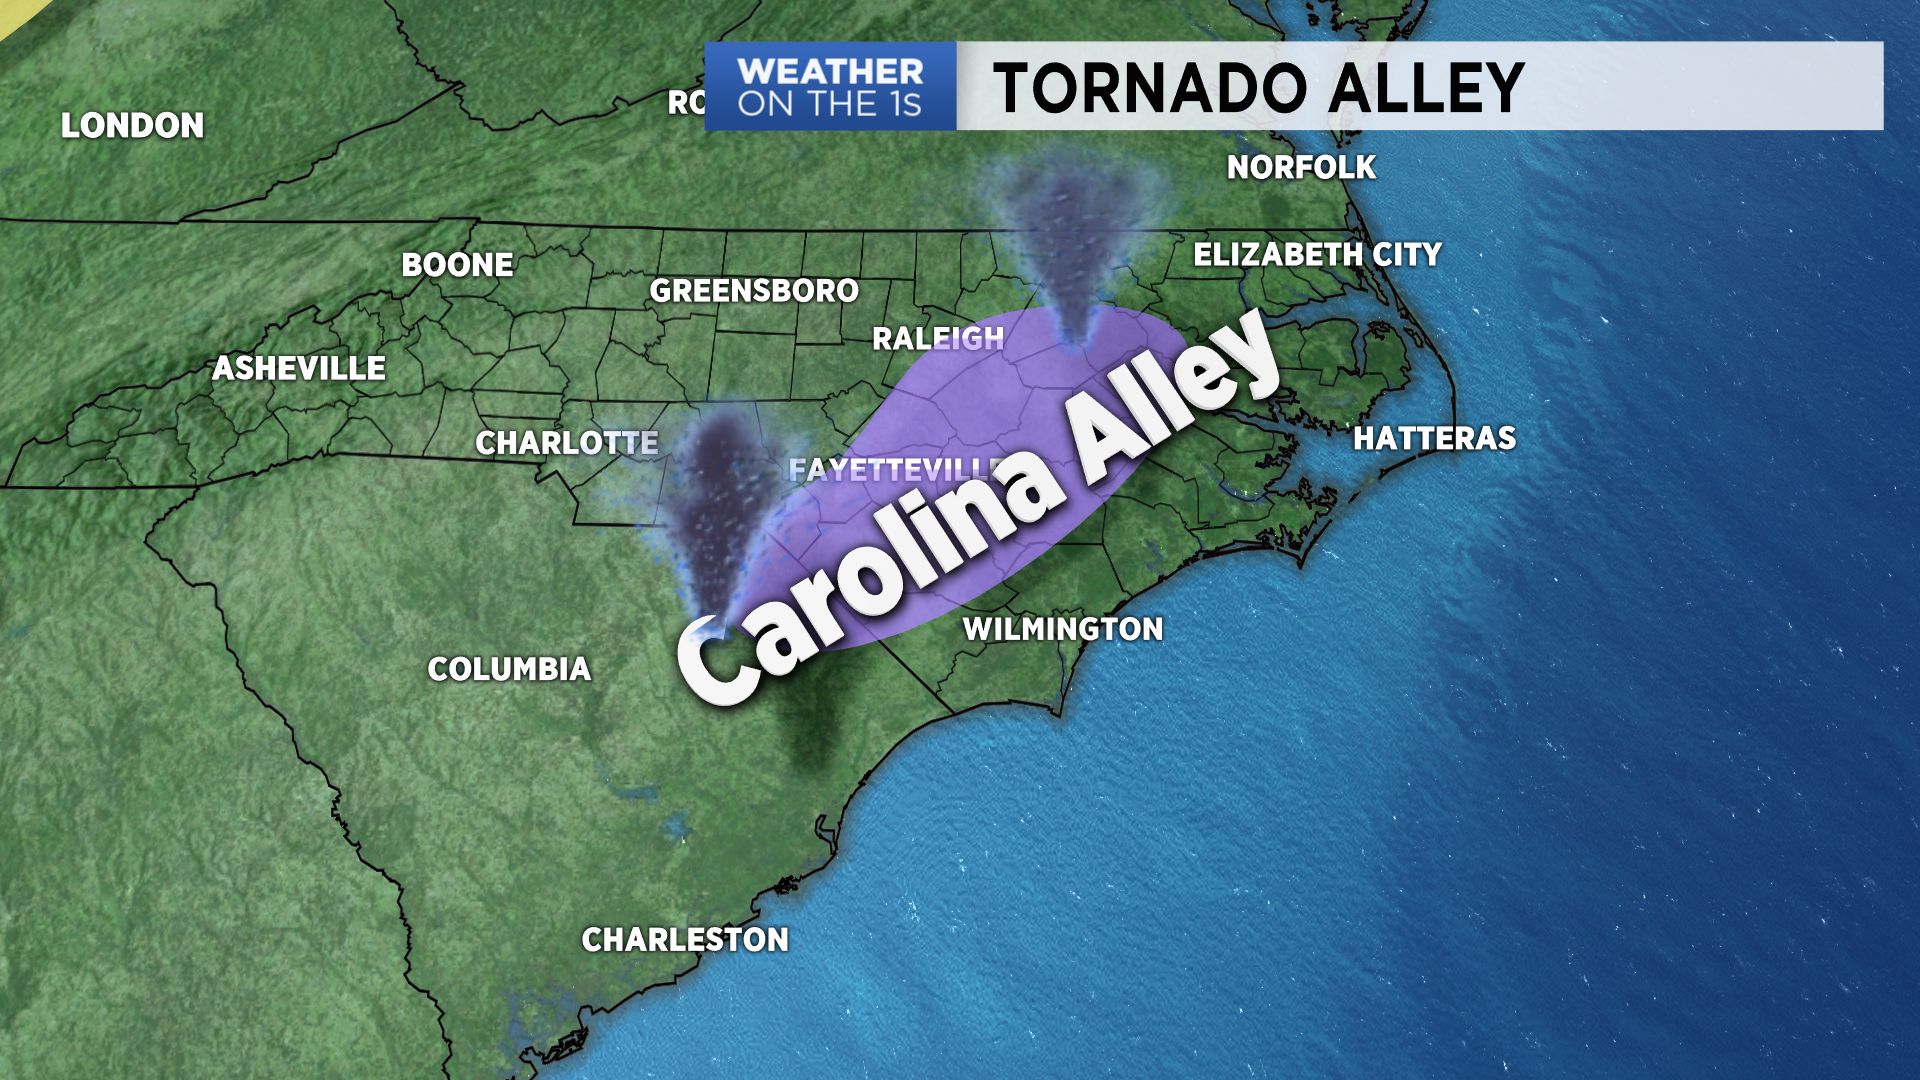 There's a Small Tornado Alley Right Here in the Carolinas